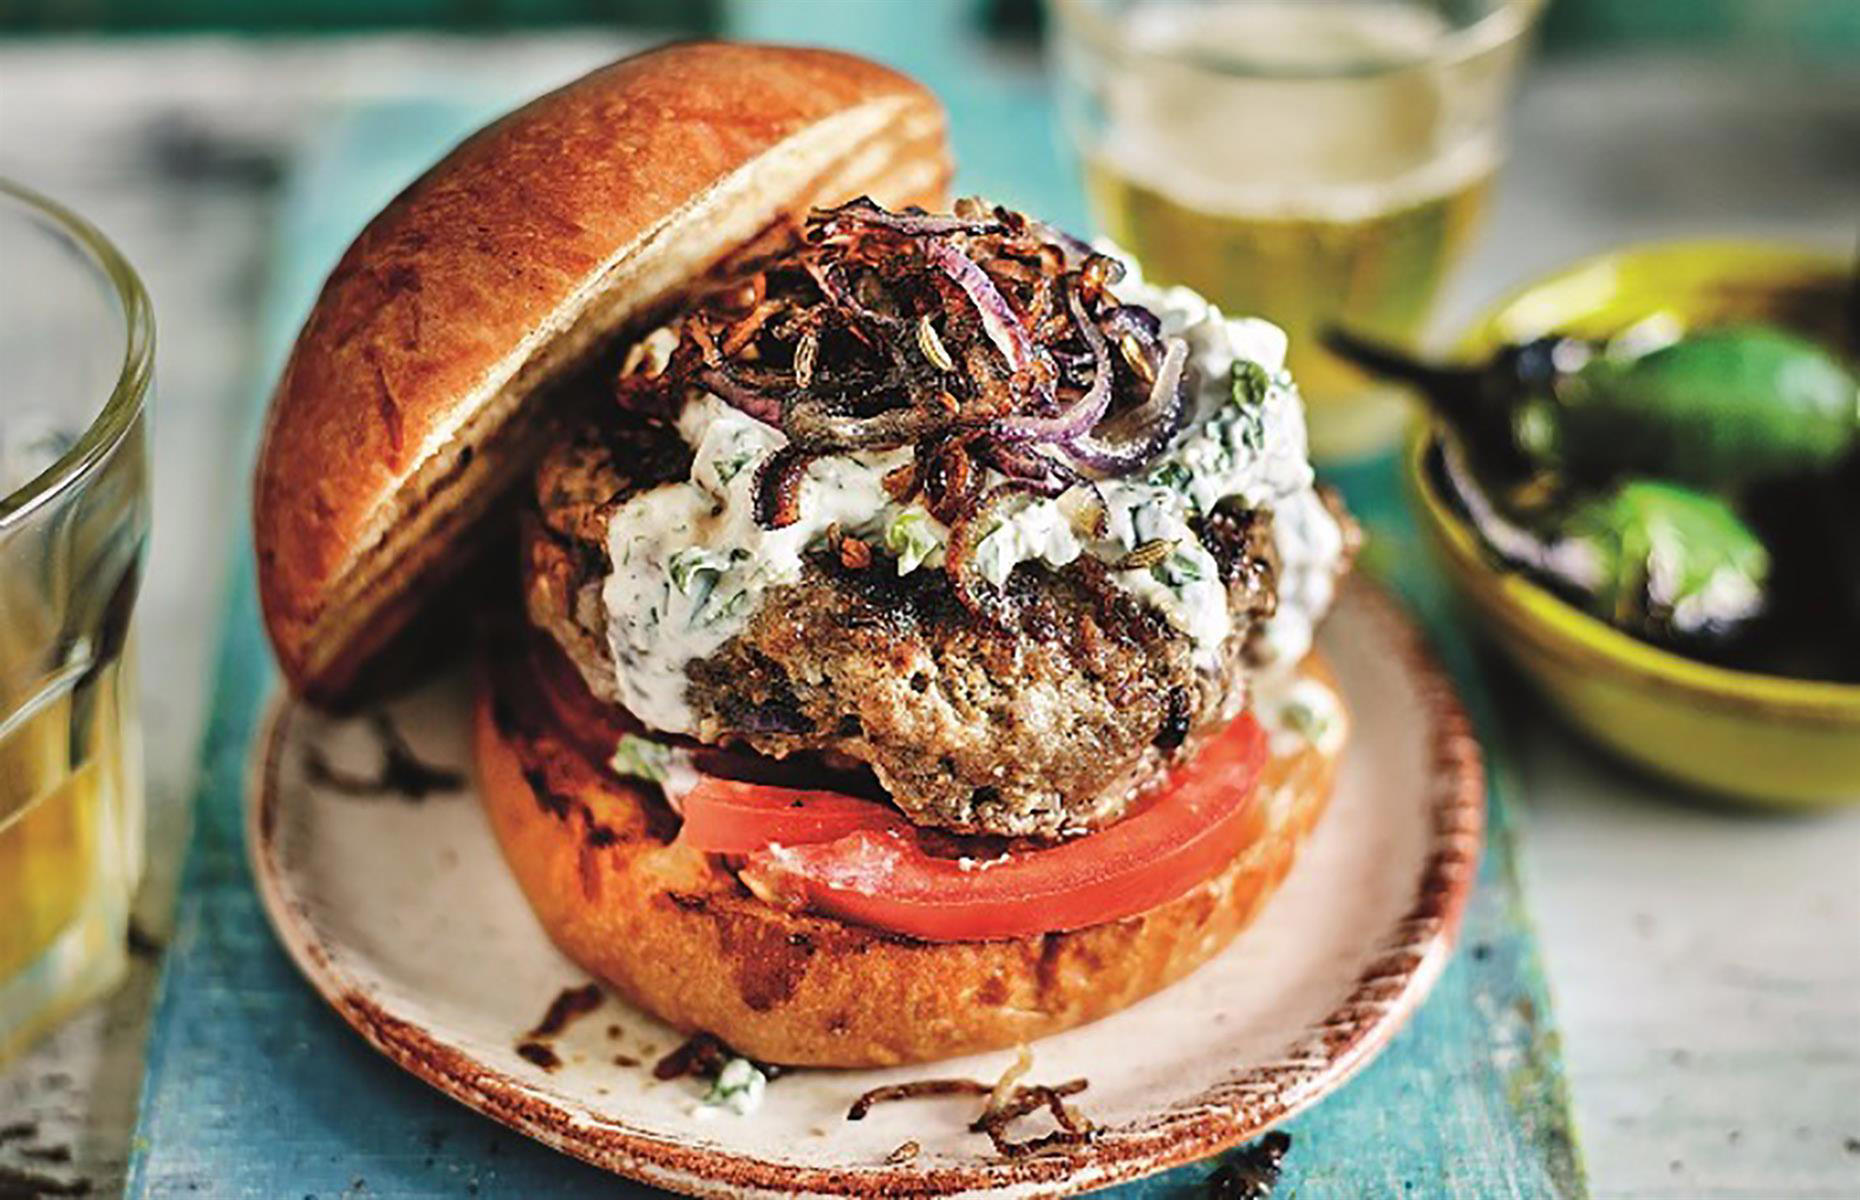 30 tasty ground beef recipes you'll love